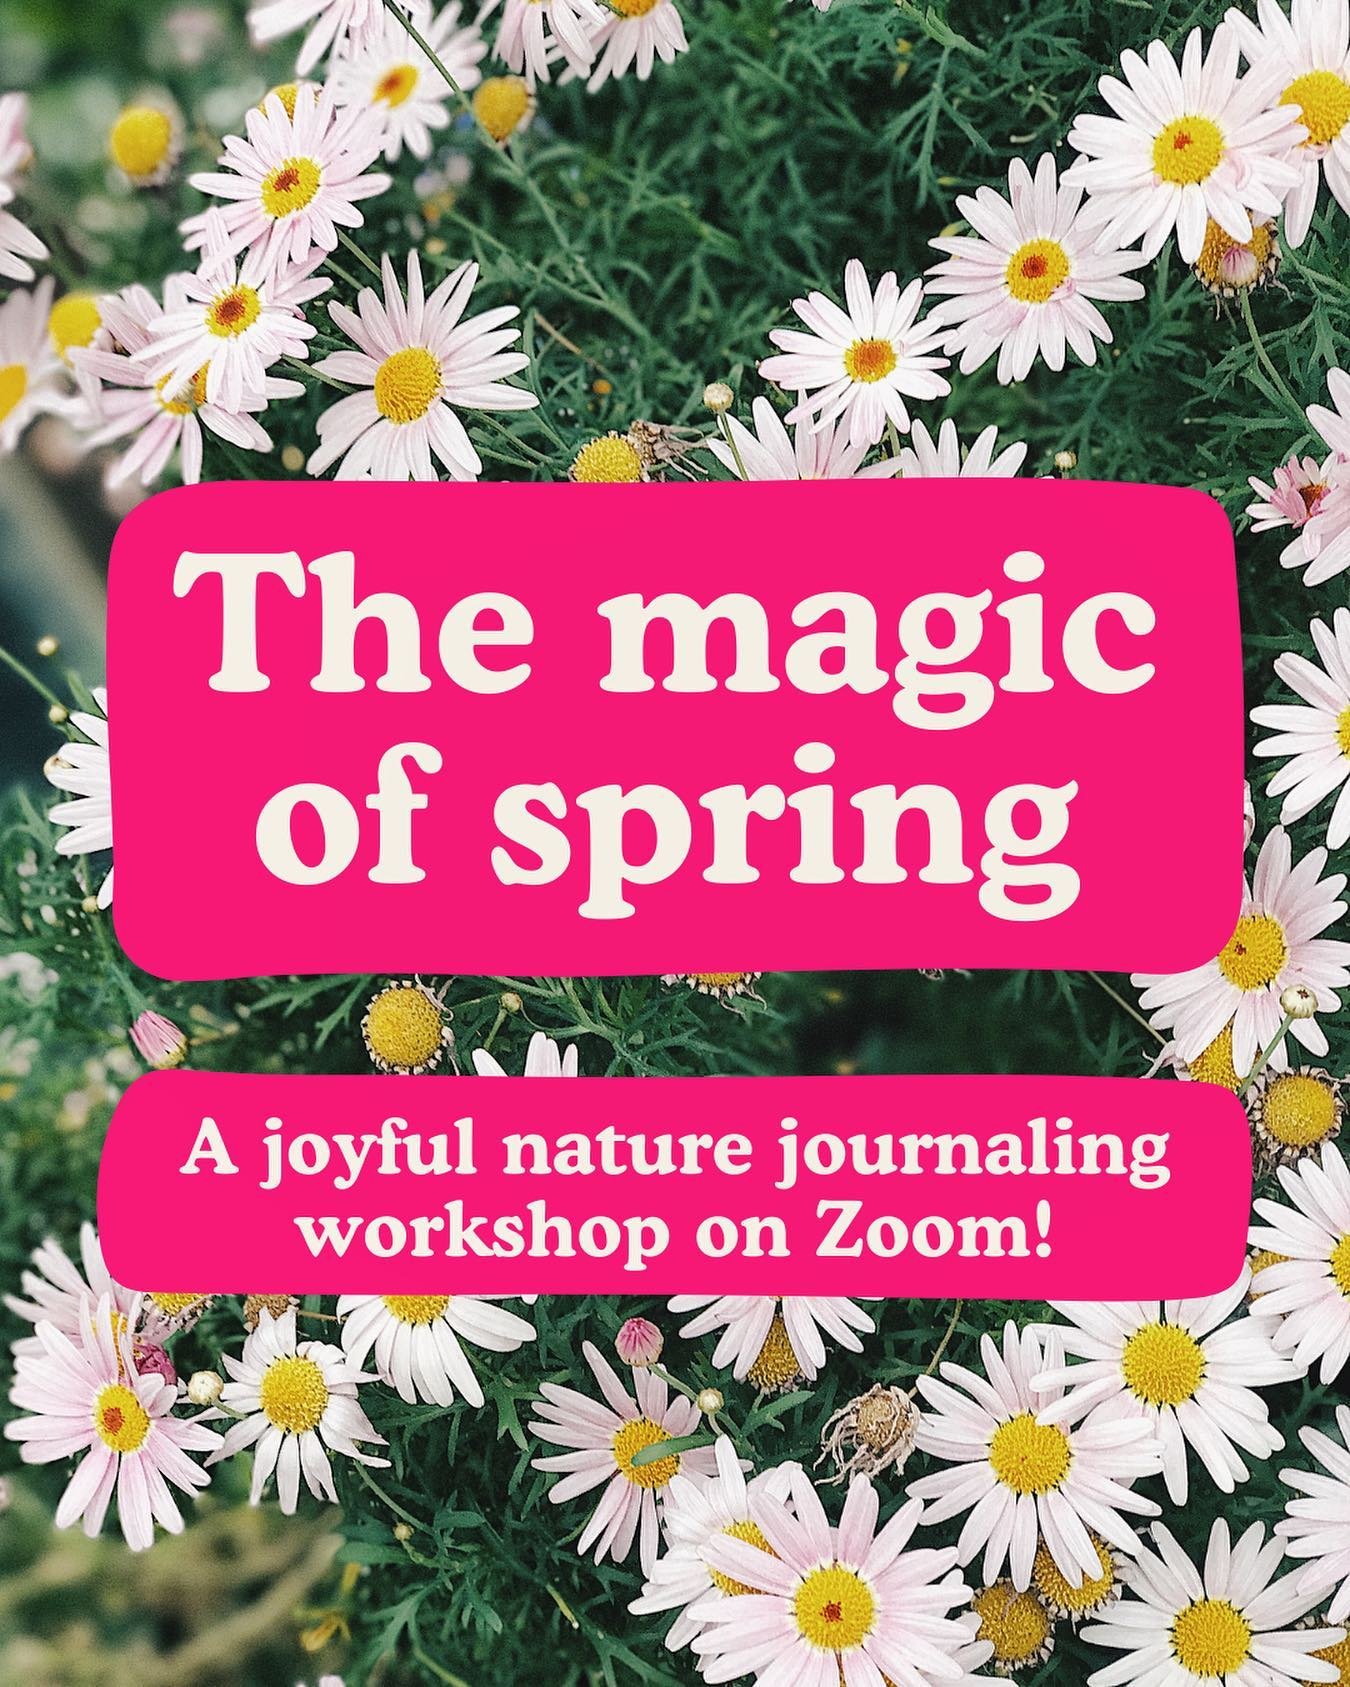 Join me tomorrow evening (17th April at 6.30pm) for two hours of guided creative journaling that&rsquo;ll help you find more joy, connection and mindfulness in nature at this magical time of year ☺️🌿🌸

Tickets are &pound;15. Click the link in my bi